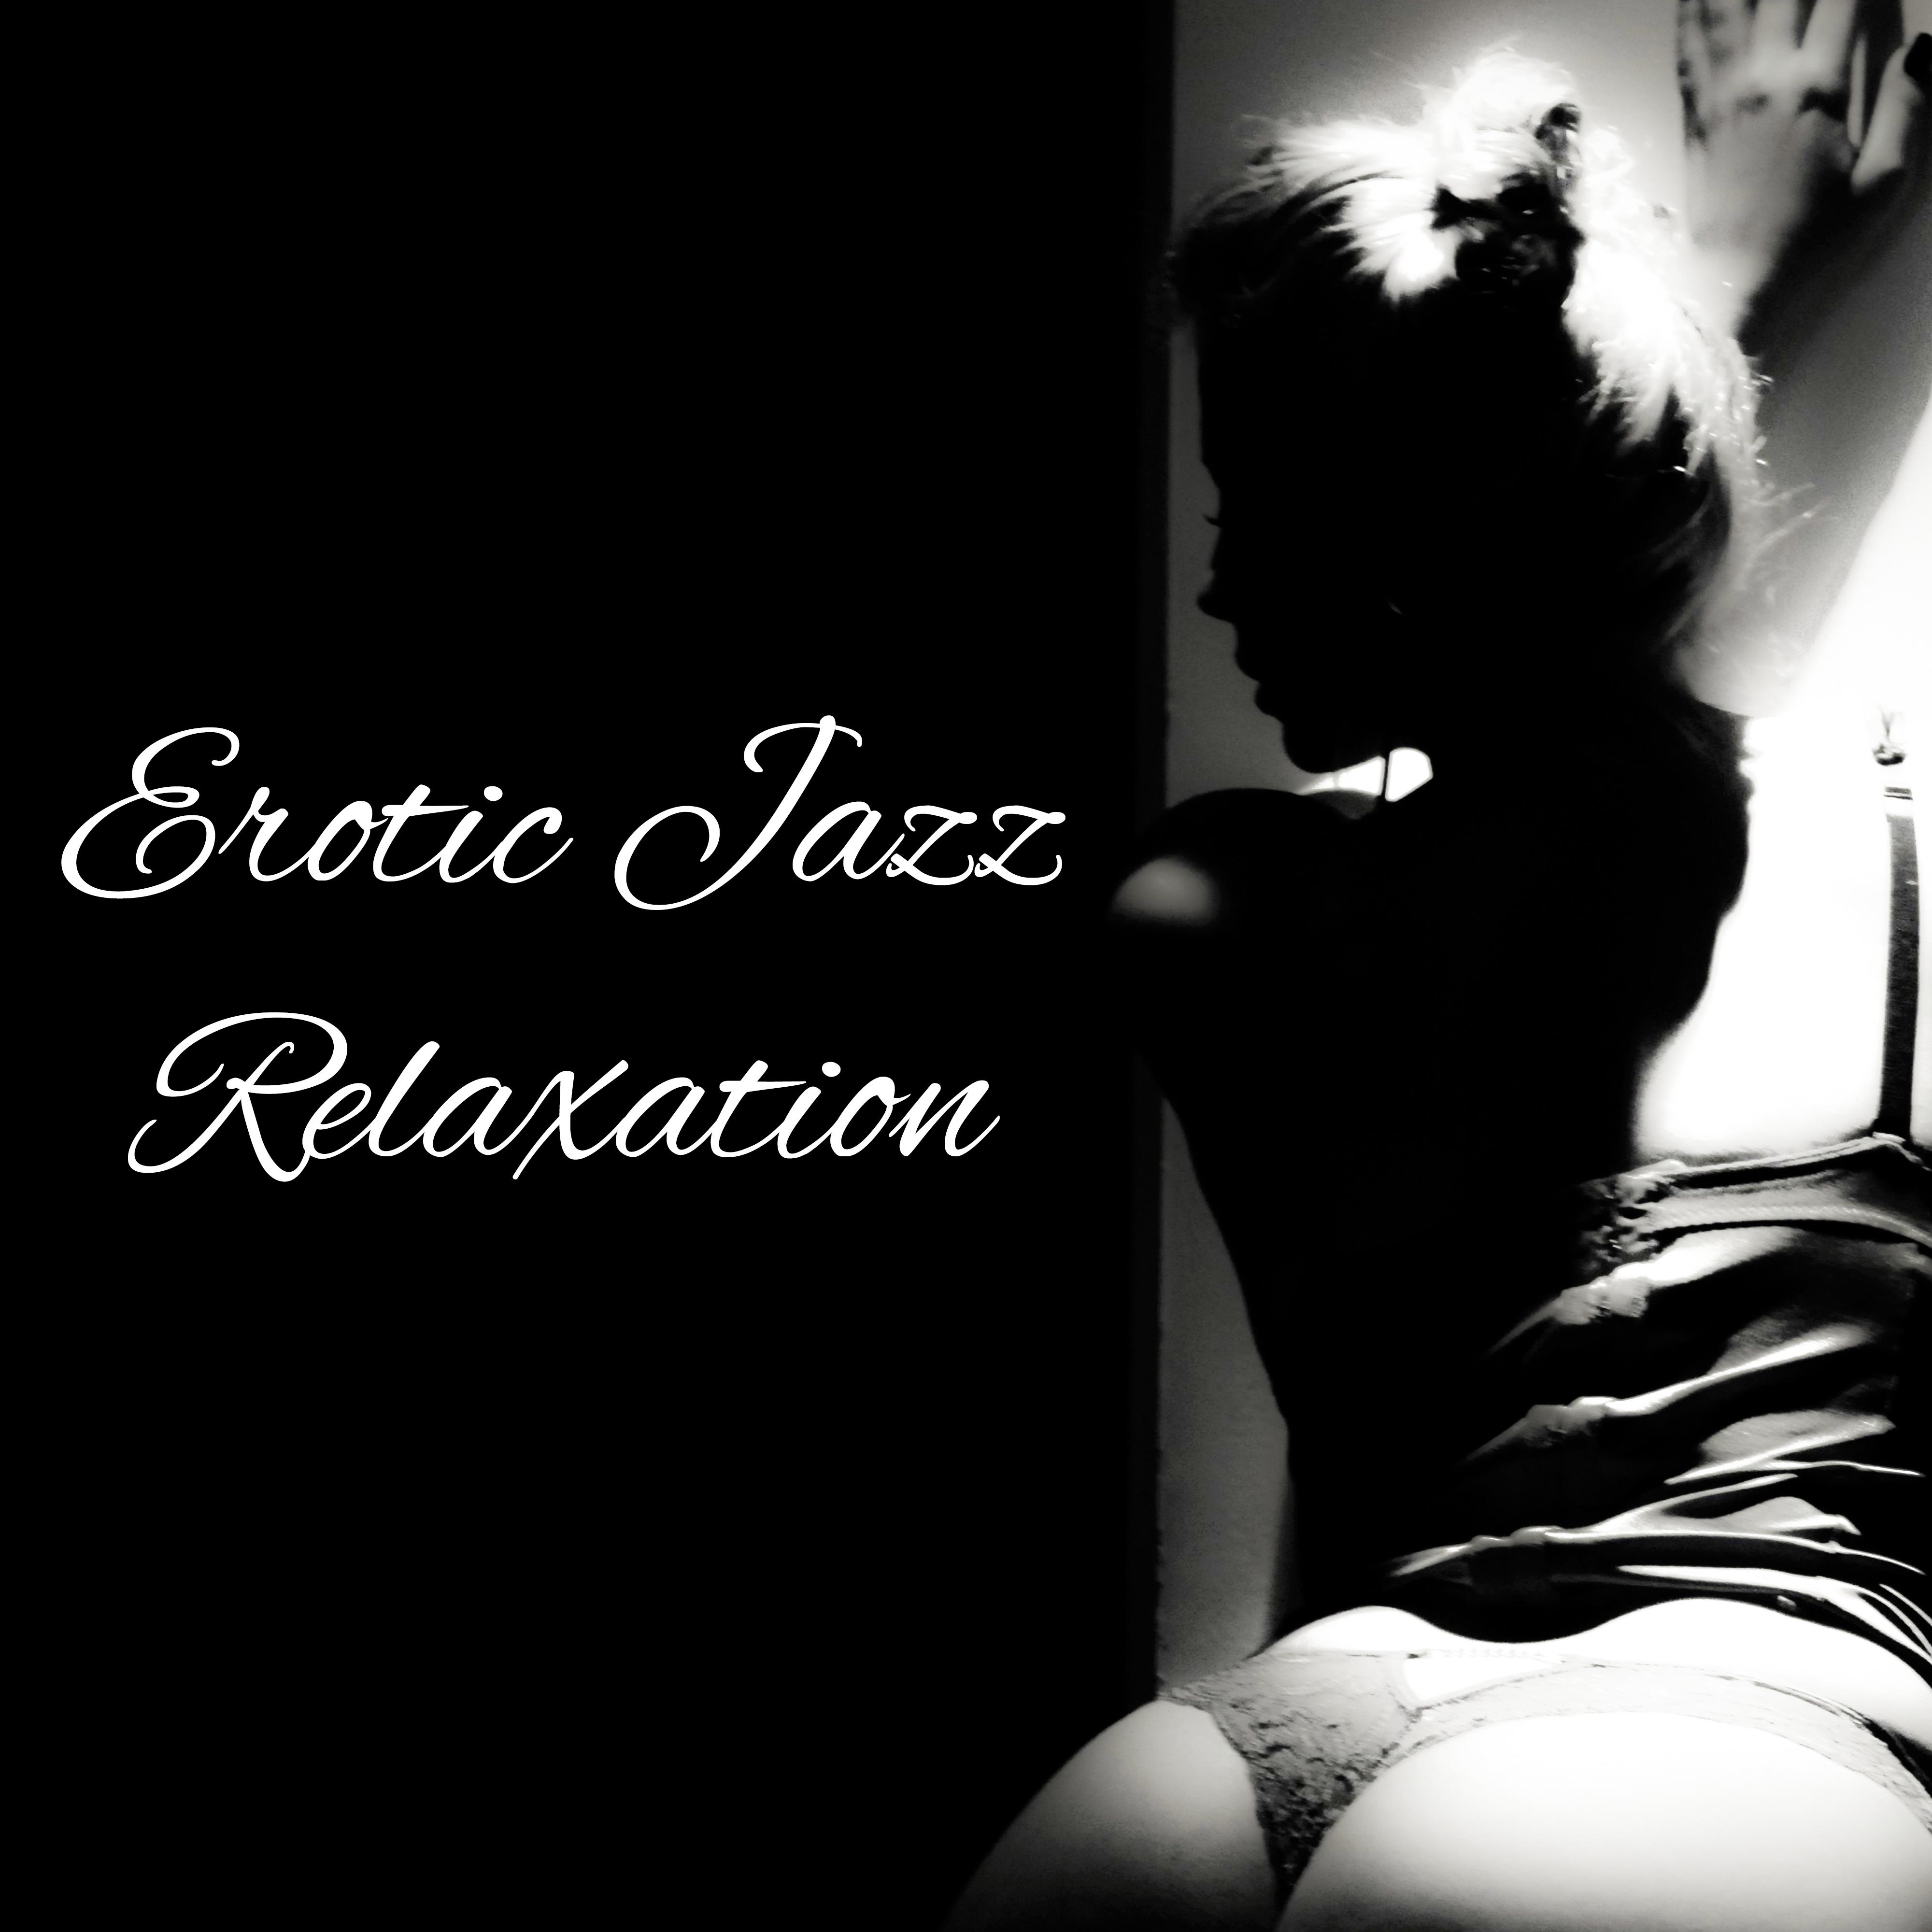 Erotic Jazz Relaxation – Sexy Jazz Lounge, Relaxed Chill, Sensual Melodies, Romantic Jazz 2017